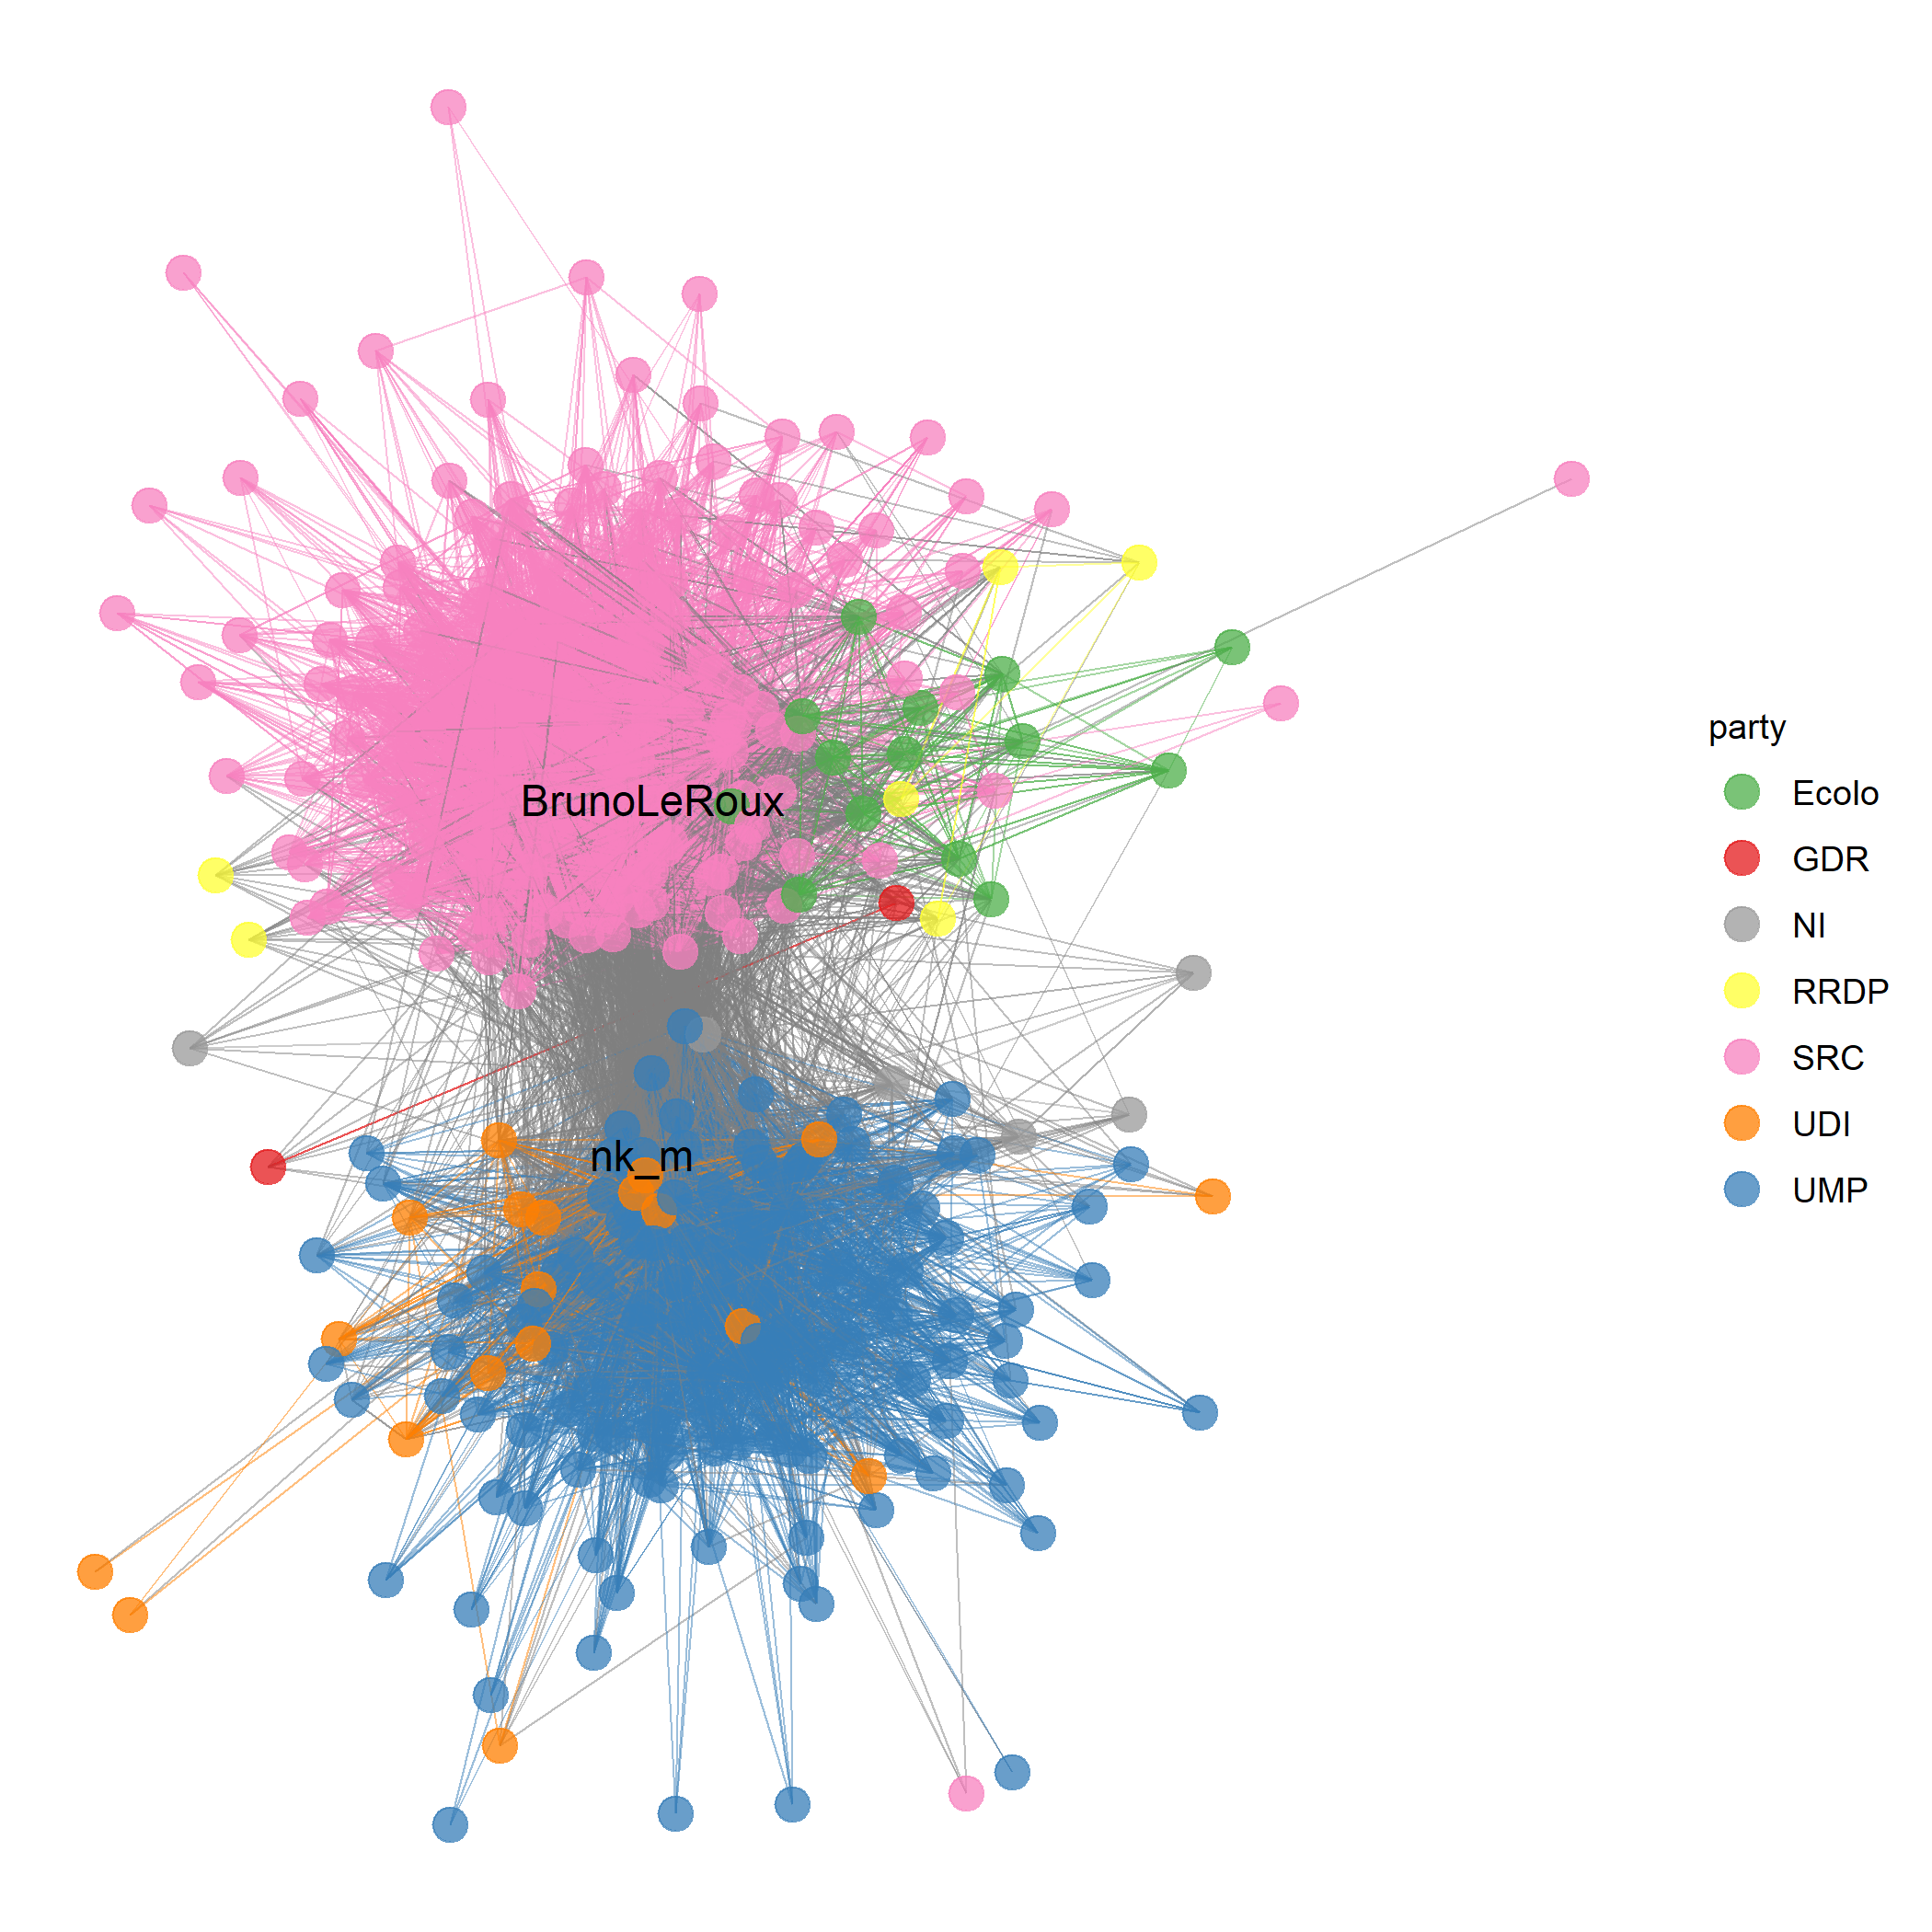 network graphic of french MPs on twitter (p1)